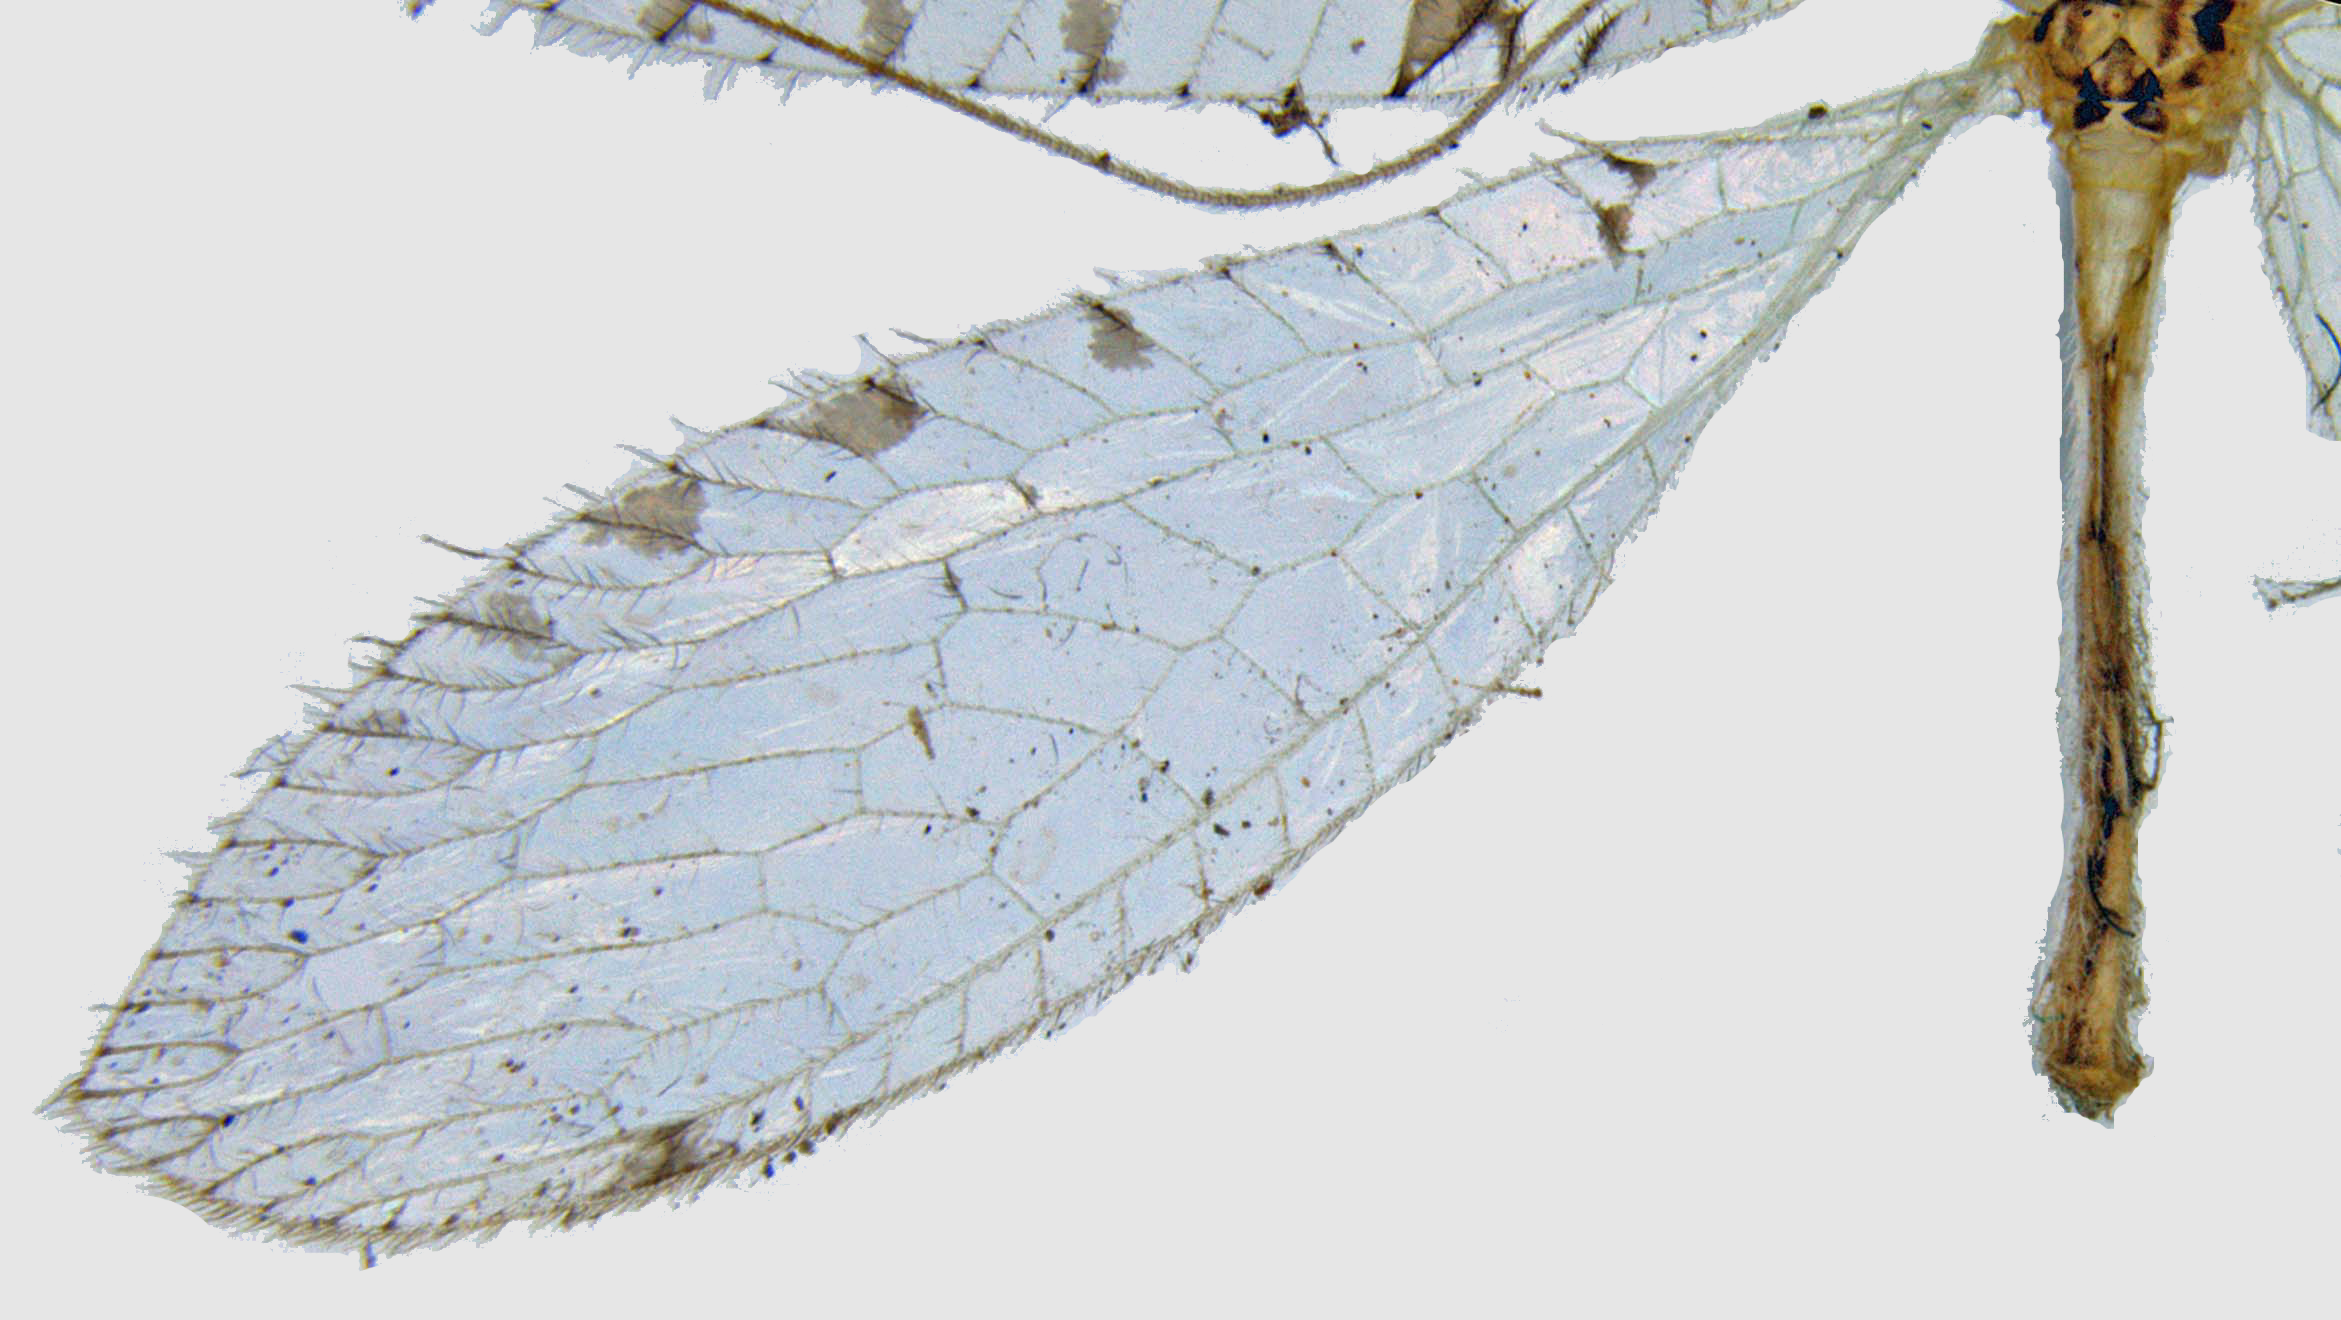 Hind wing